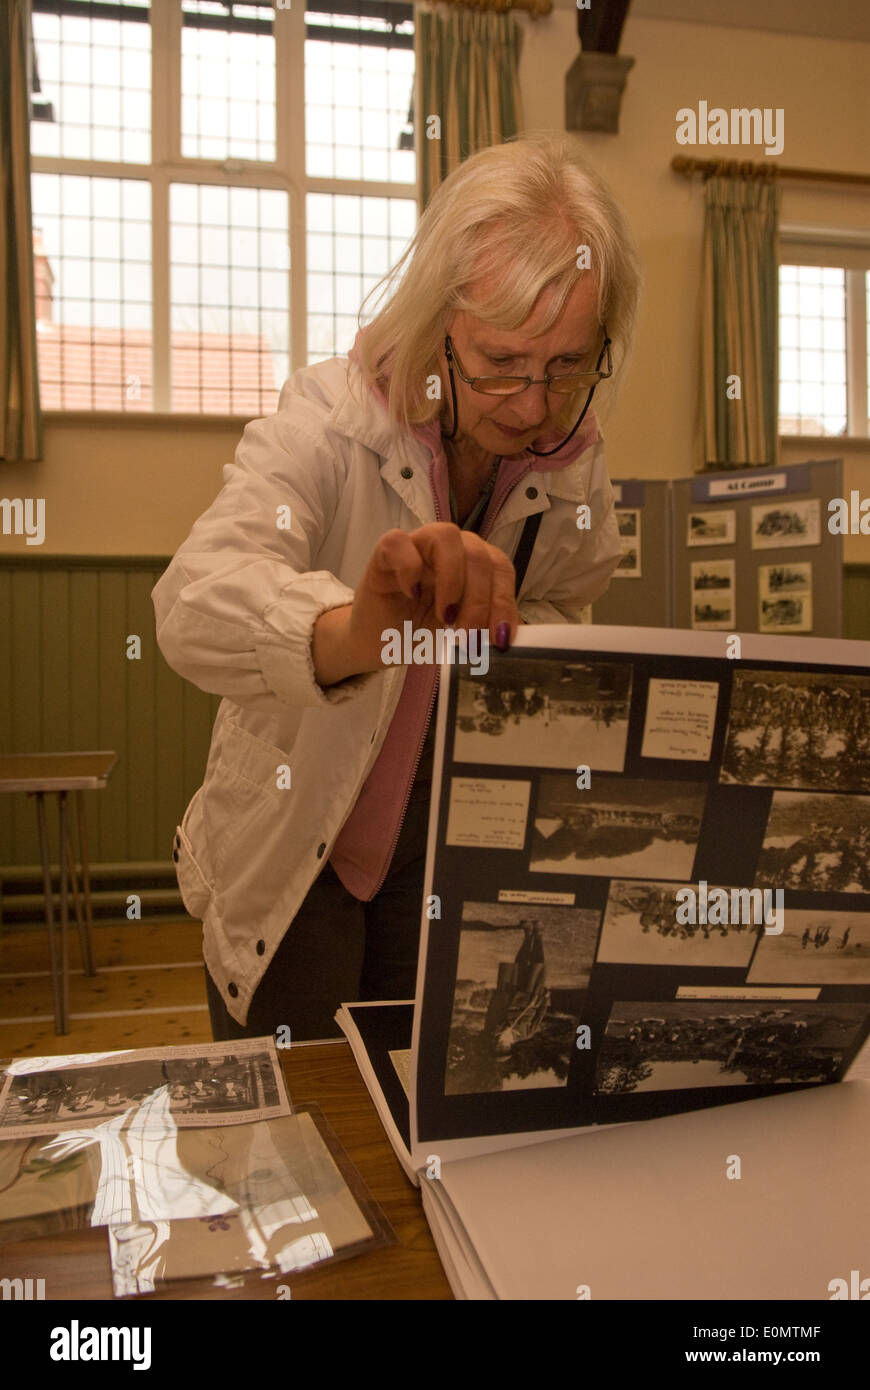 Elderly woman leafing through WW1 memorabilia at an exhibition documenting memories and artefacts from World War One... Stock Photo